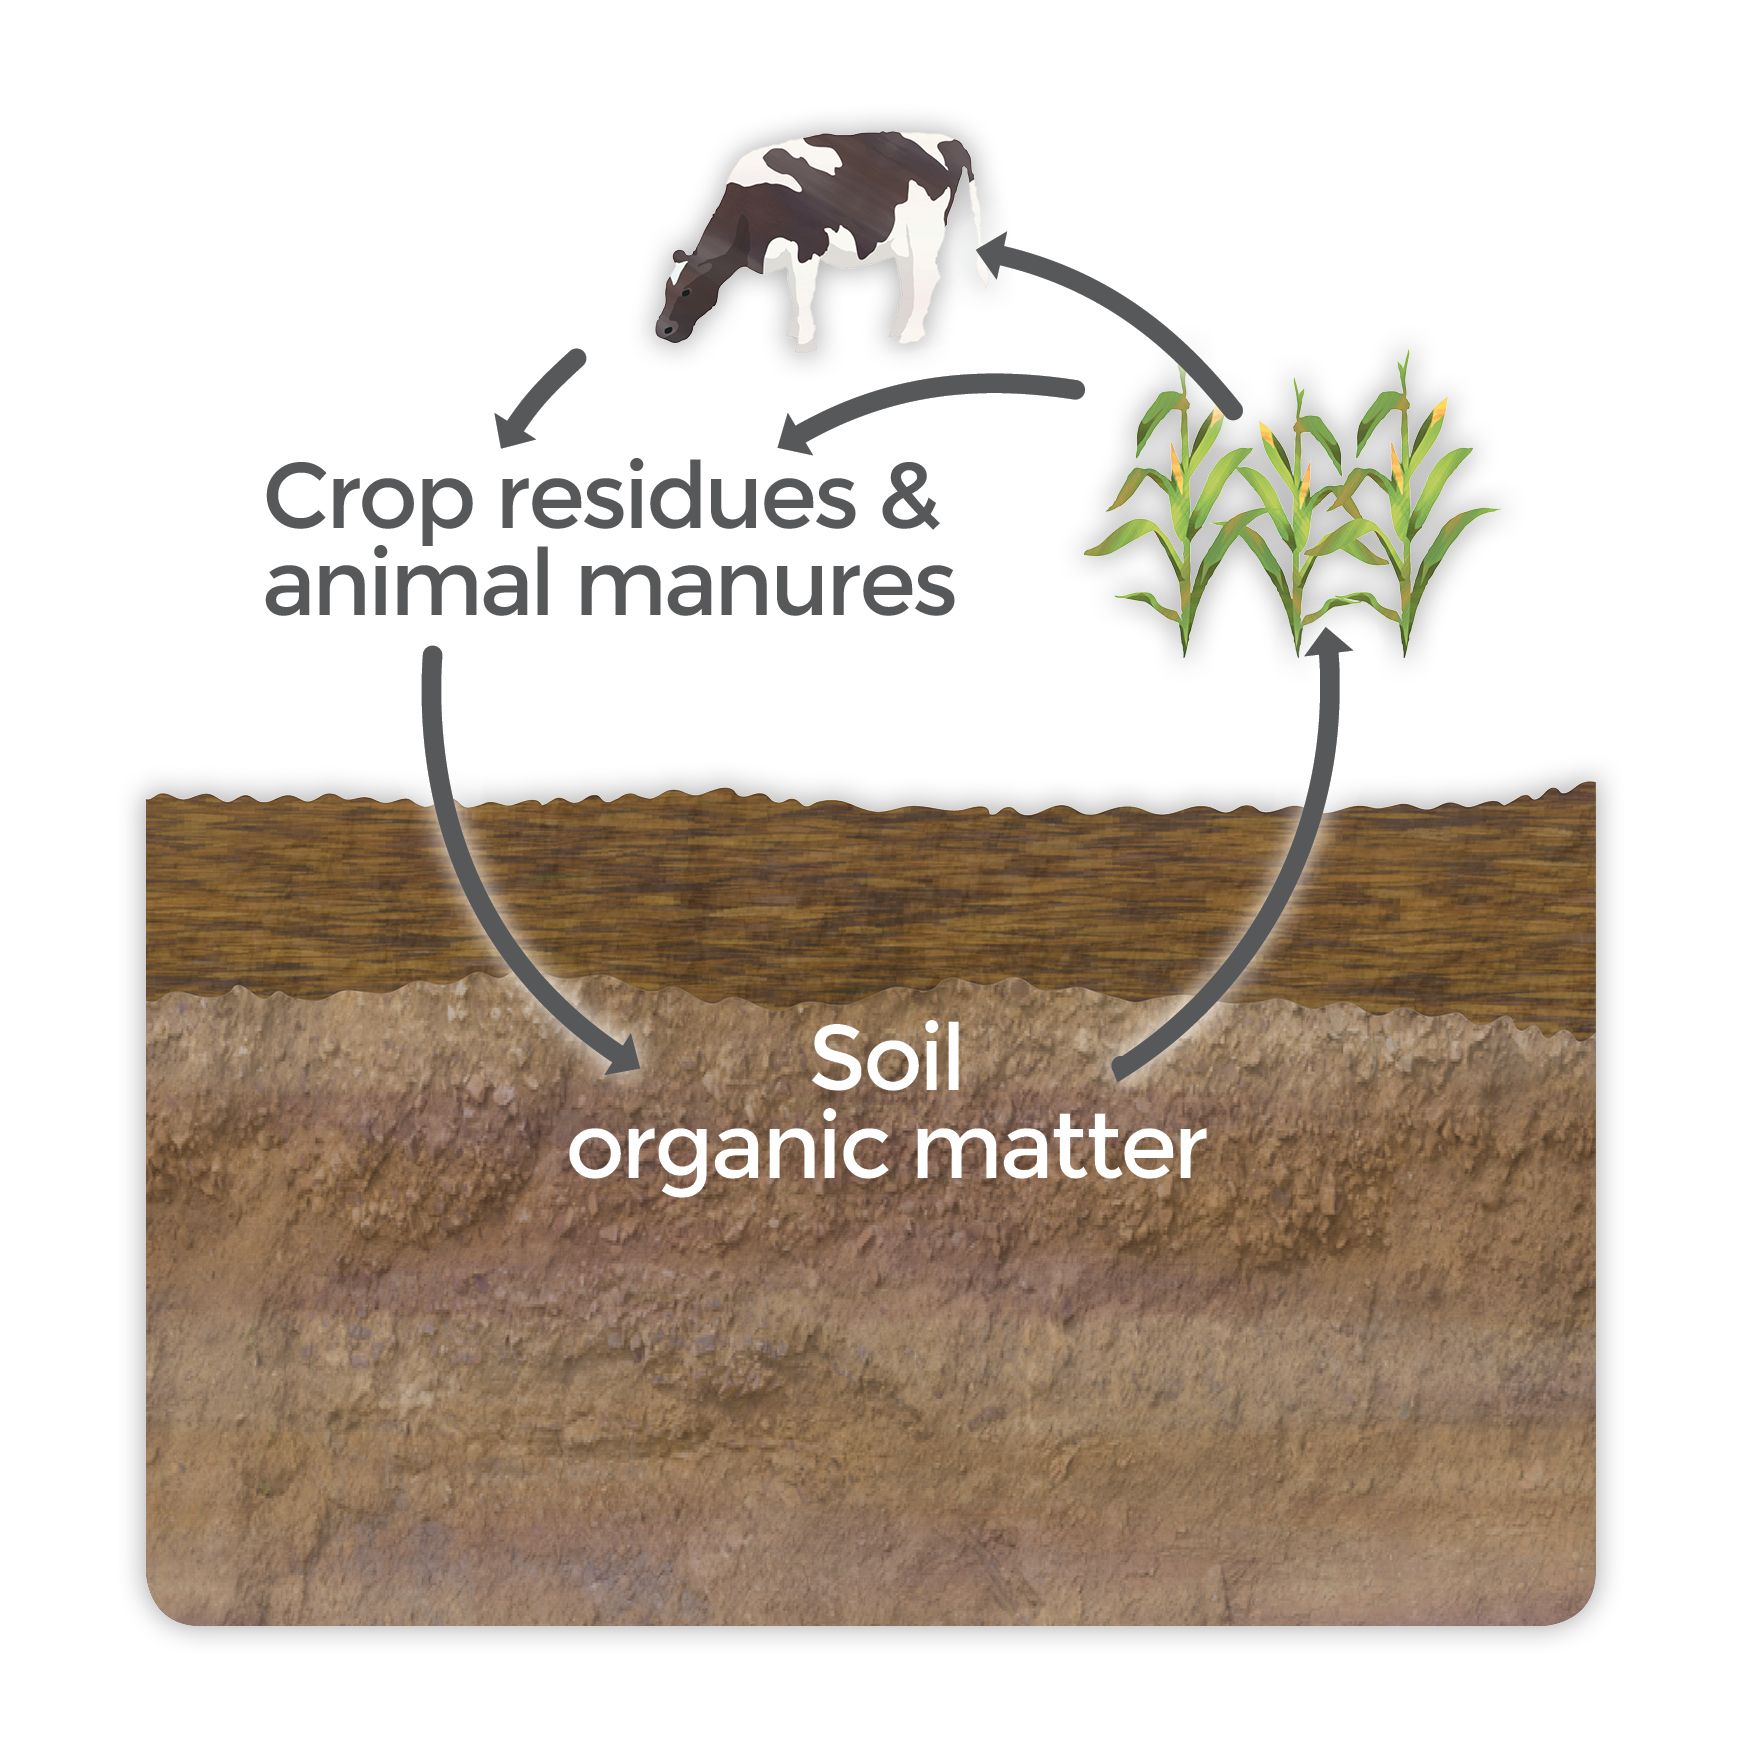 Cycle of soil organic matter from plants to grazers to soil and back to plants